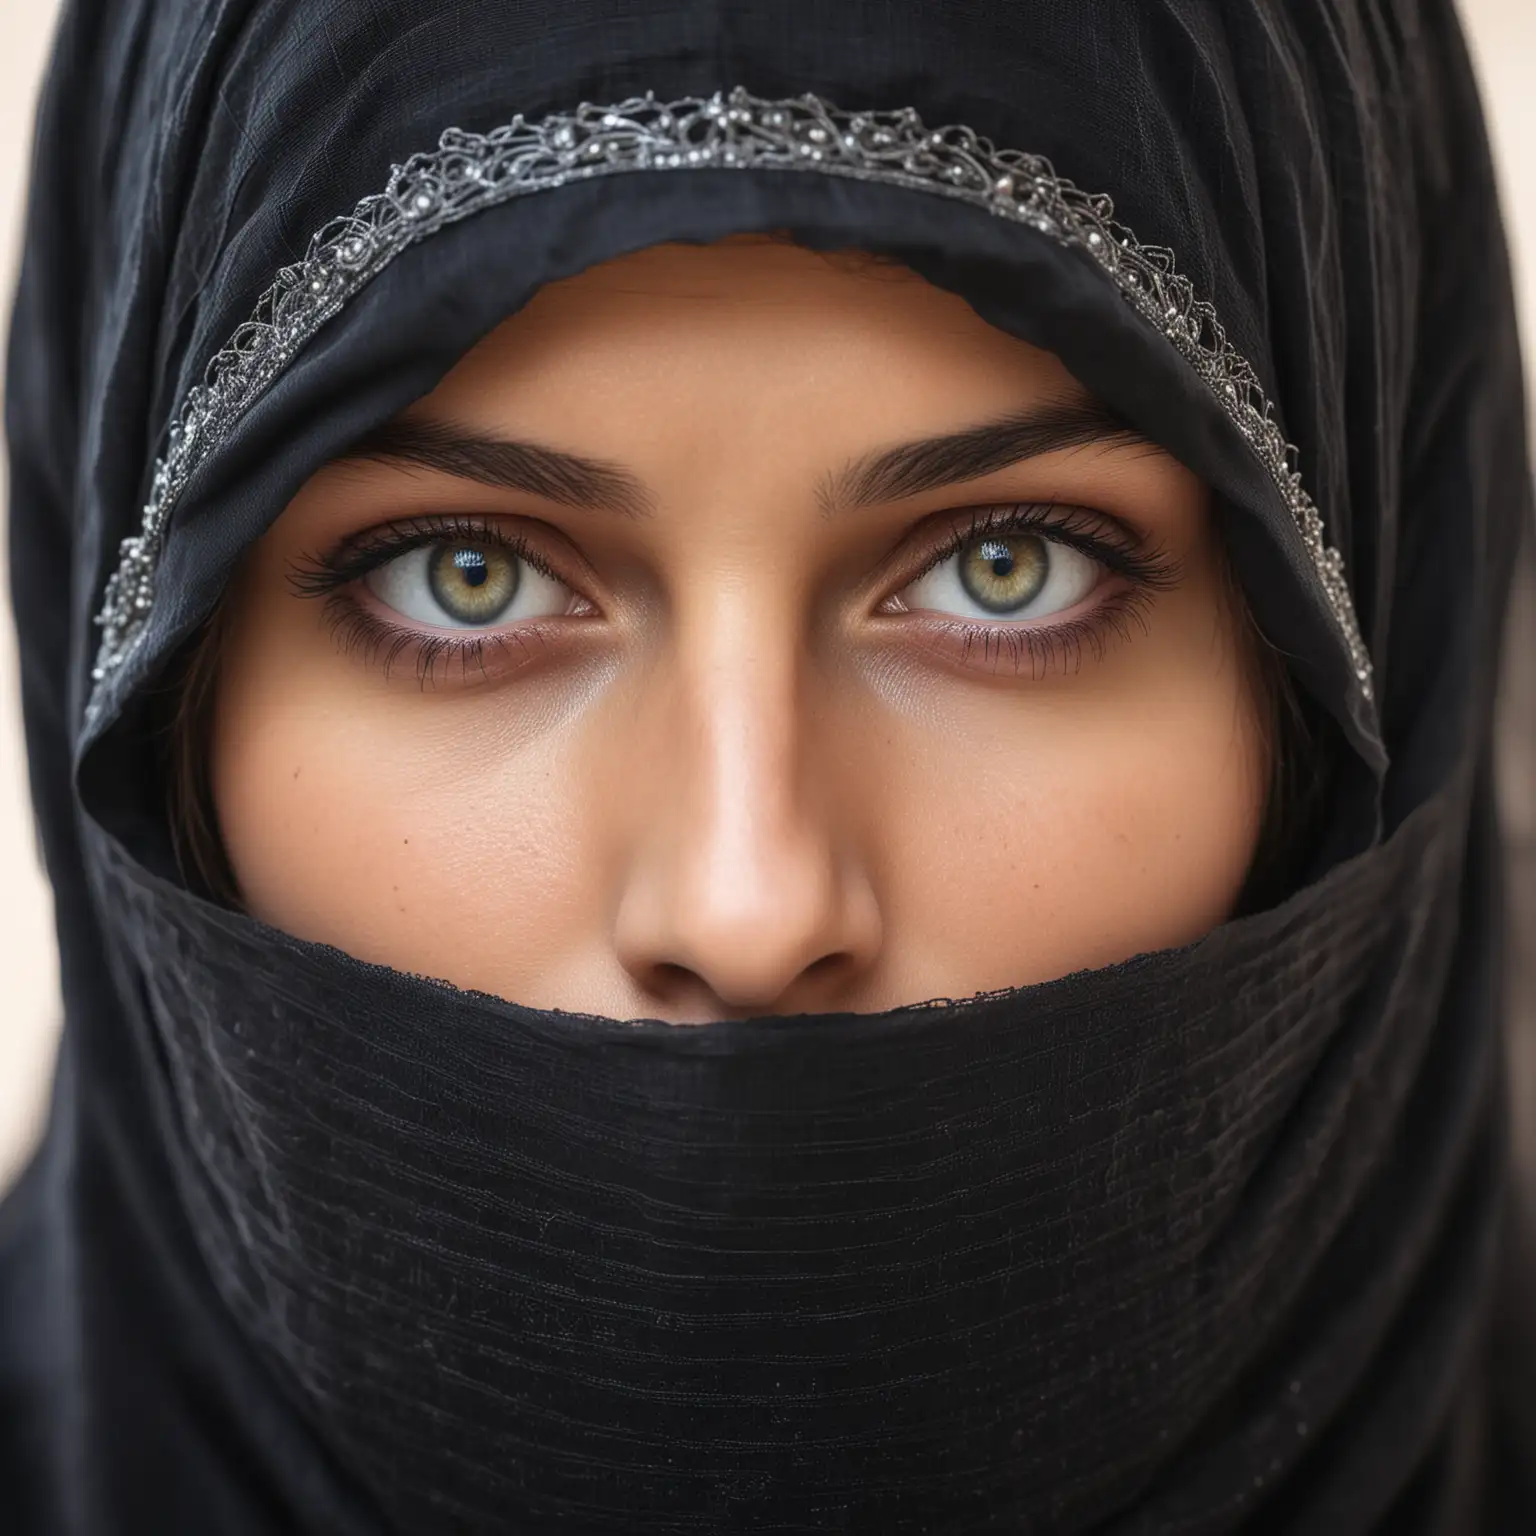 Portrait of a Beautiful Woman in a Burka with Captivating Eyes